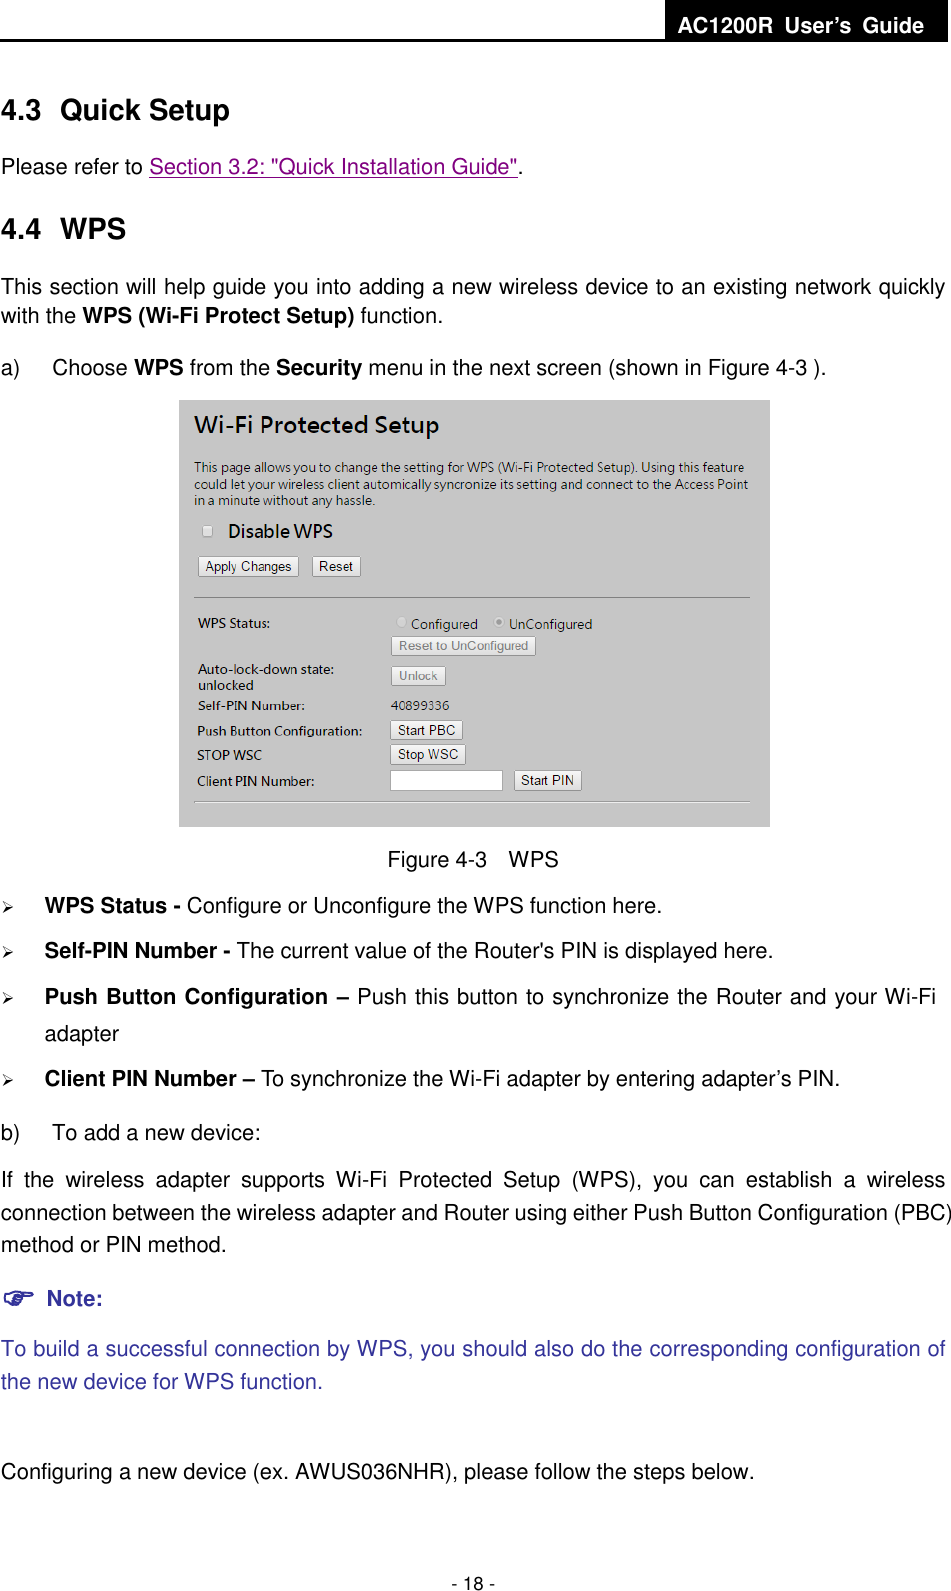  AC1200R  User’s  Guide  - 18 - 4.3  Quick Setup Please refer to Section 3.2: &quot;Quick Installation Guide&quot;. 4.4  WPS This section will help guide you into adding a new wireless device to an existing network quickly with the WPS (Wi-Fi Protect Setup) function.   a)  Choose WPS from the Security menu in the next screen (shown in Figure 4-3 ).    Figure 4-3    WPS  WPS Status - Configure or Unconfigure the WPS function here.    Self-PIN Number - The current value of the Router&apos;s PIN is displayed here.    Push Button Configuration – Push this button to synchronize the Router and your Wi-Fi adapter    Client PIN Number – To synchronize the Wi-Fi adapter by entering adapter’s PIN.   b)  To add a new device: If  the  wireless  adapter  supports  Wi-Fi  Protected  Setup  (WPS),  you  can  establish  a  wireless connection between the wireless adapter and Router using either Push Button Configuration (PBC) method or PIN method.  Note: To build a successful connection by WPS, you should also do the corresponding configuration of the new device for WPS function.  Configuring a new device (ex. AWUS036NHR), please follow the steps below. 